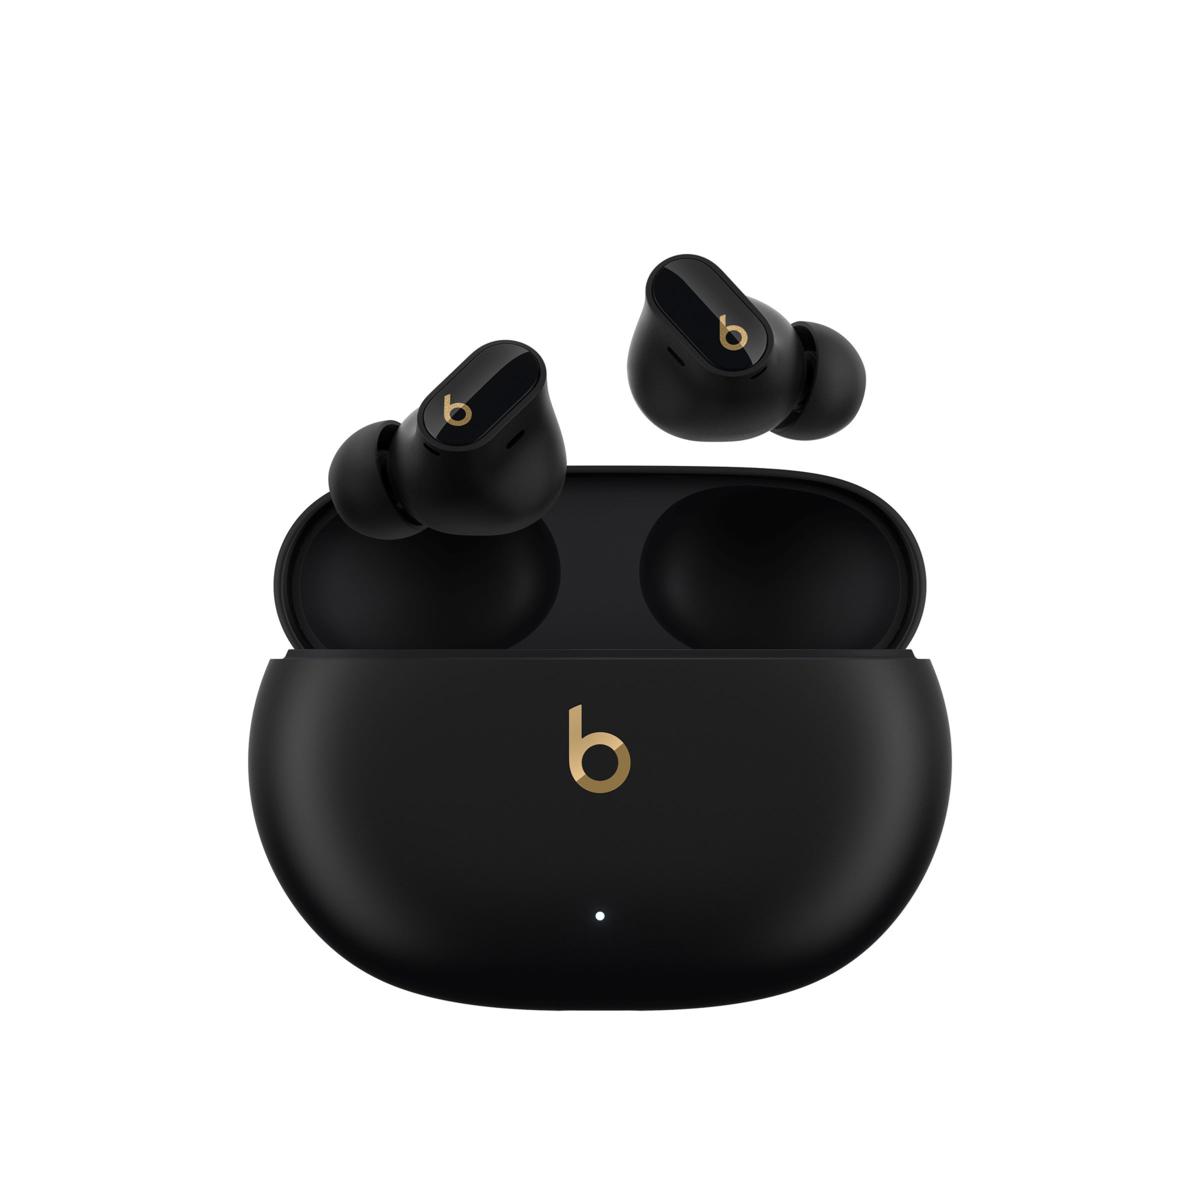 Disabling Touch Controls On Beats Flex Wireless Earbuds